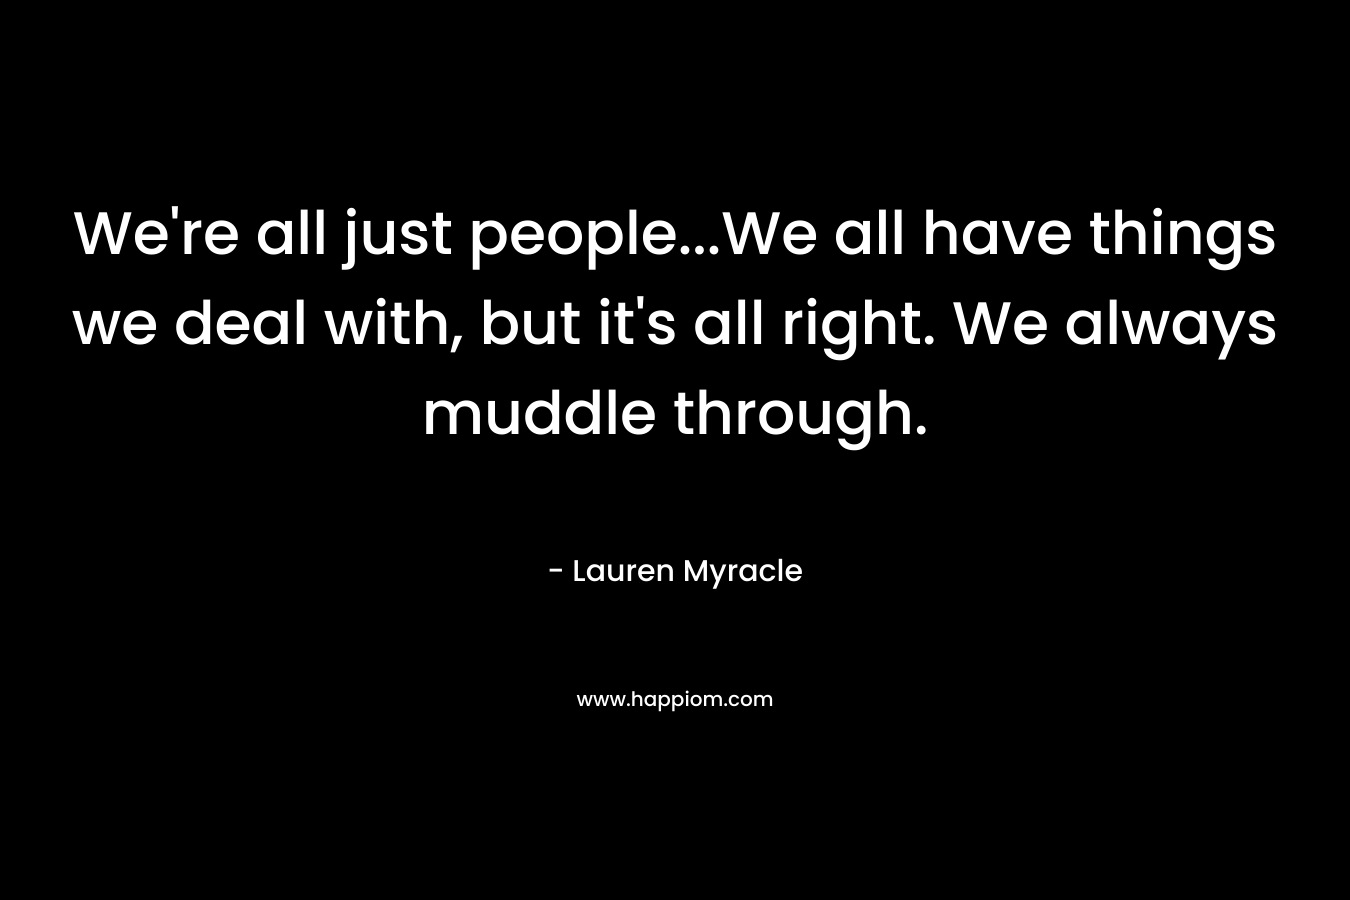 We’re all just people…We all have things we deal with, but it’s all right. We always muddle through. – Lauren Myracle